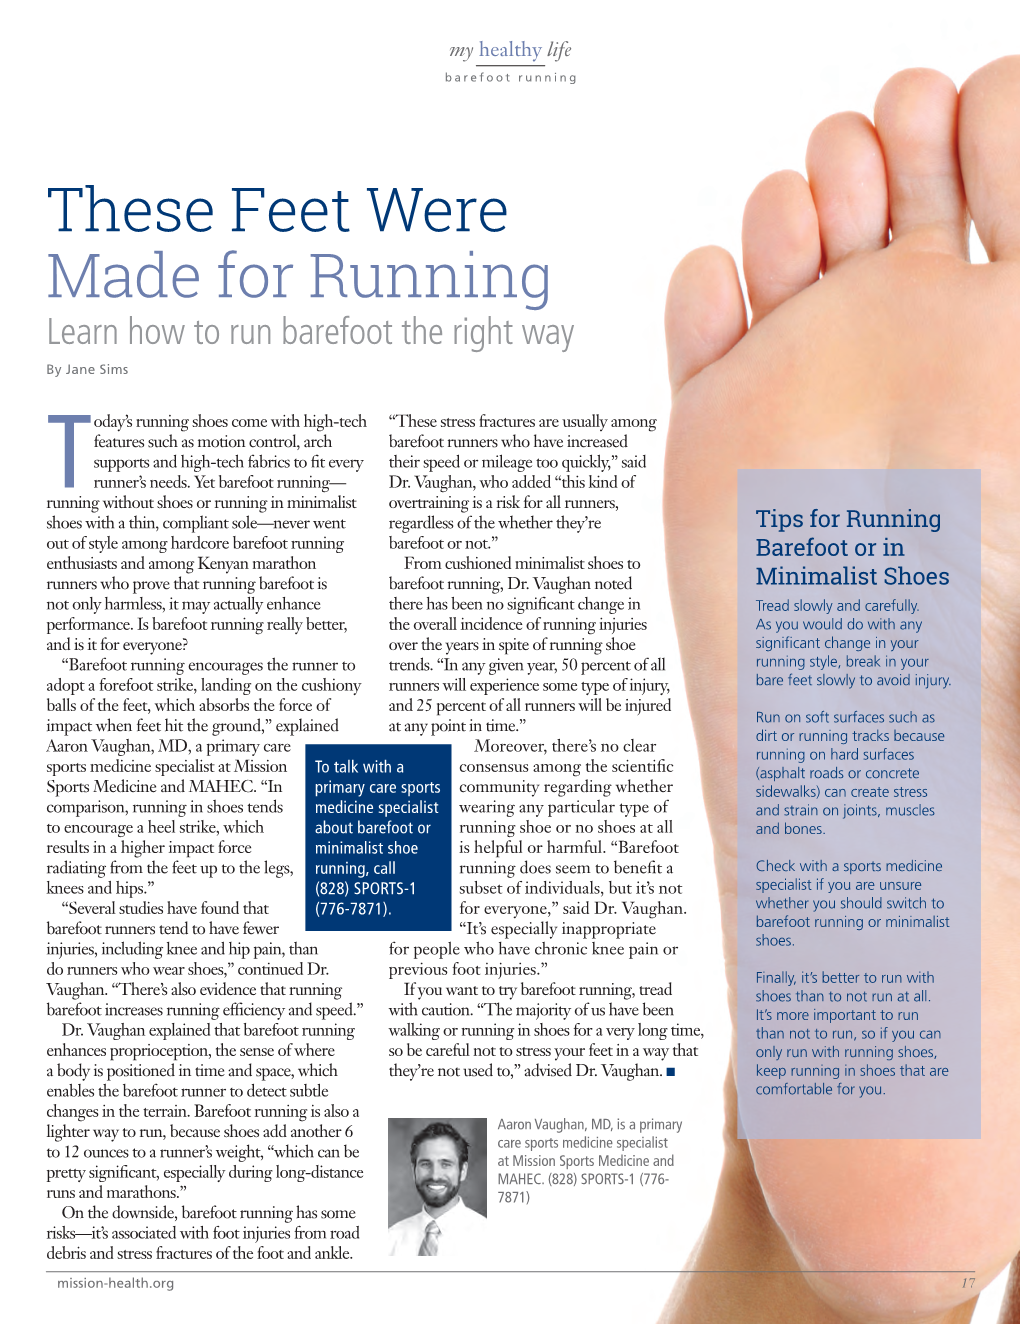 These Feet Were Made for Running Learn How to Run Barefoot the Right Way by Jane Sims